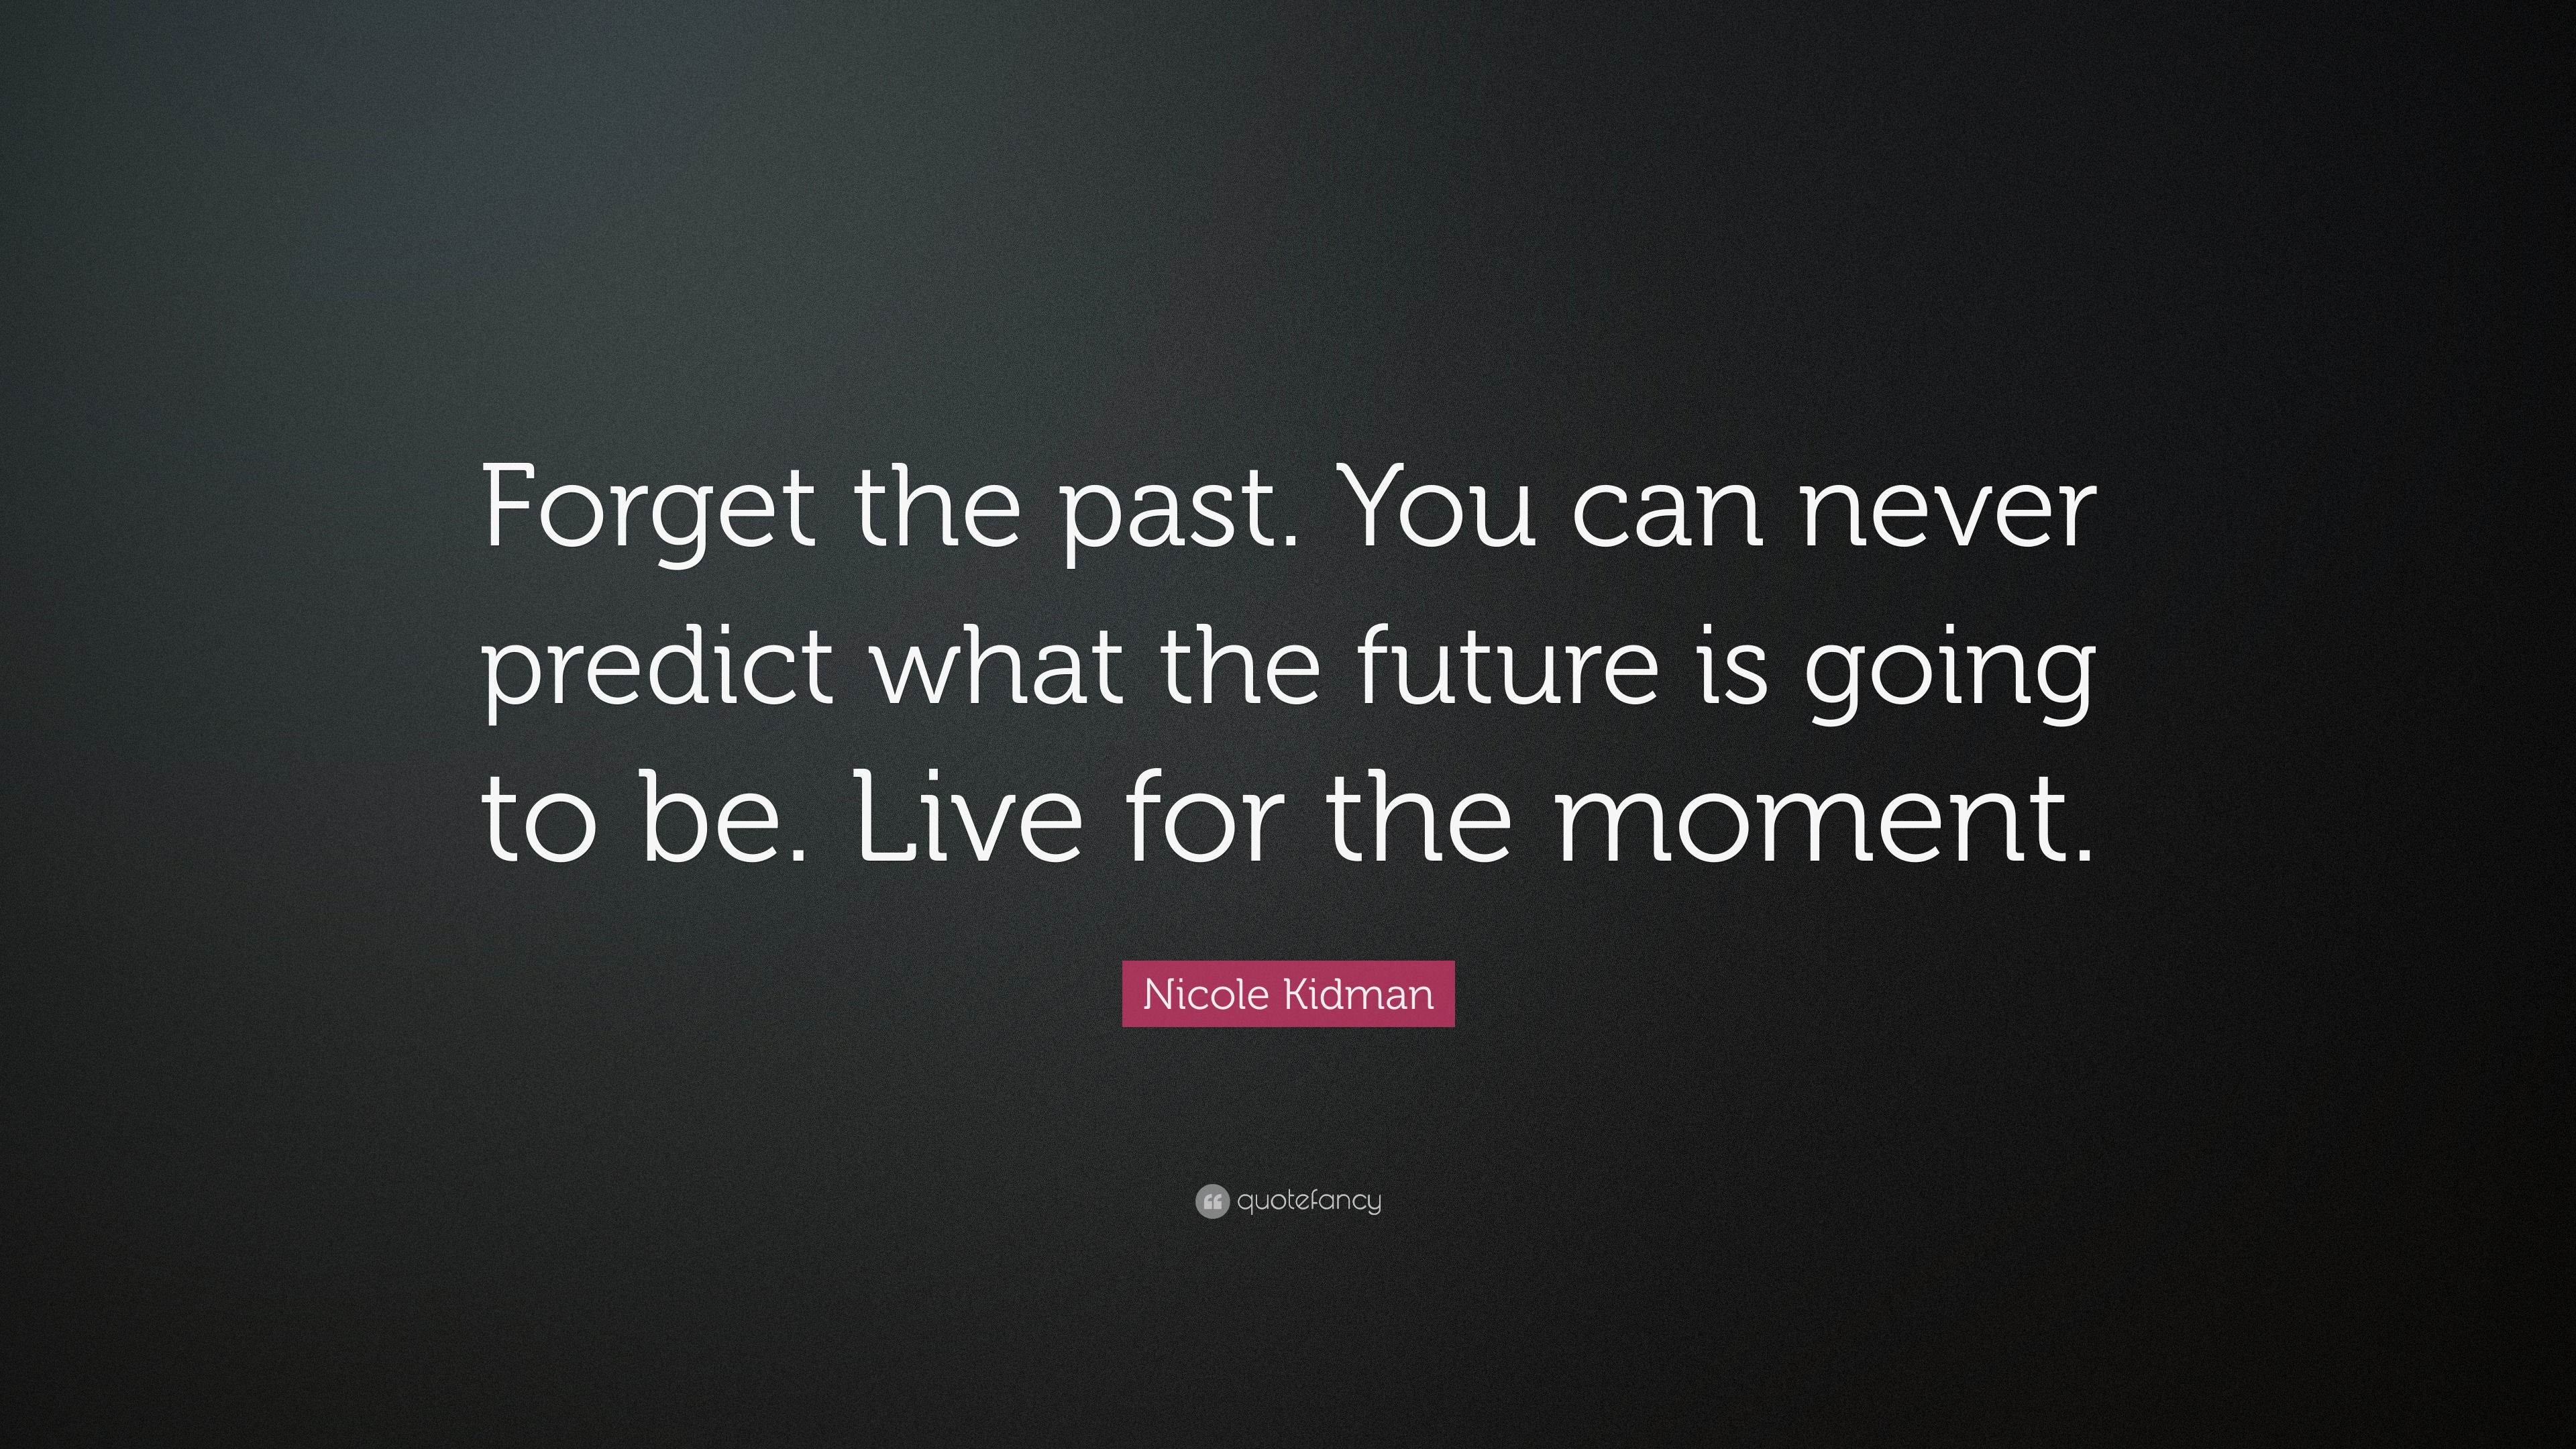 Nicole Kidman Quote: “Forget the past. You can never predict what the ...